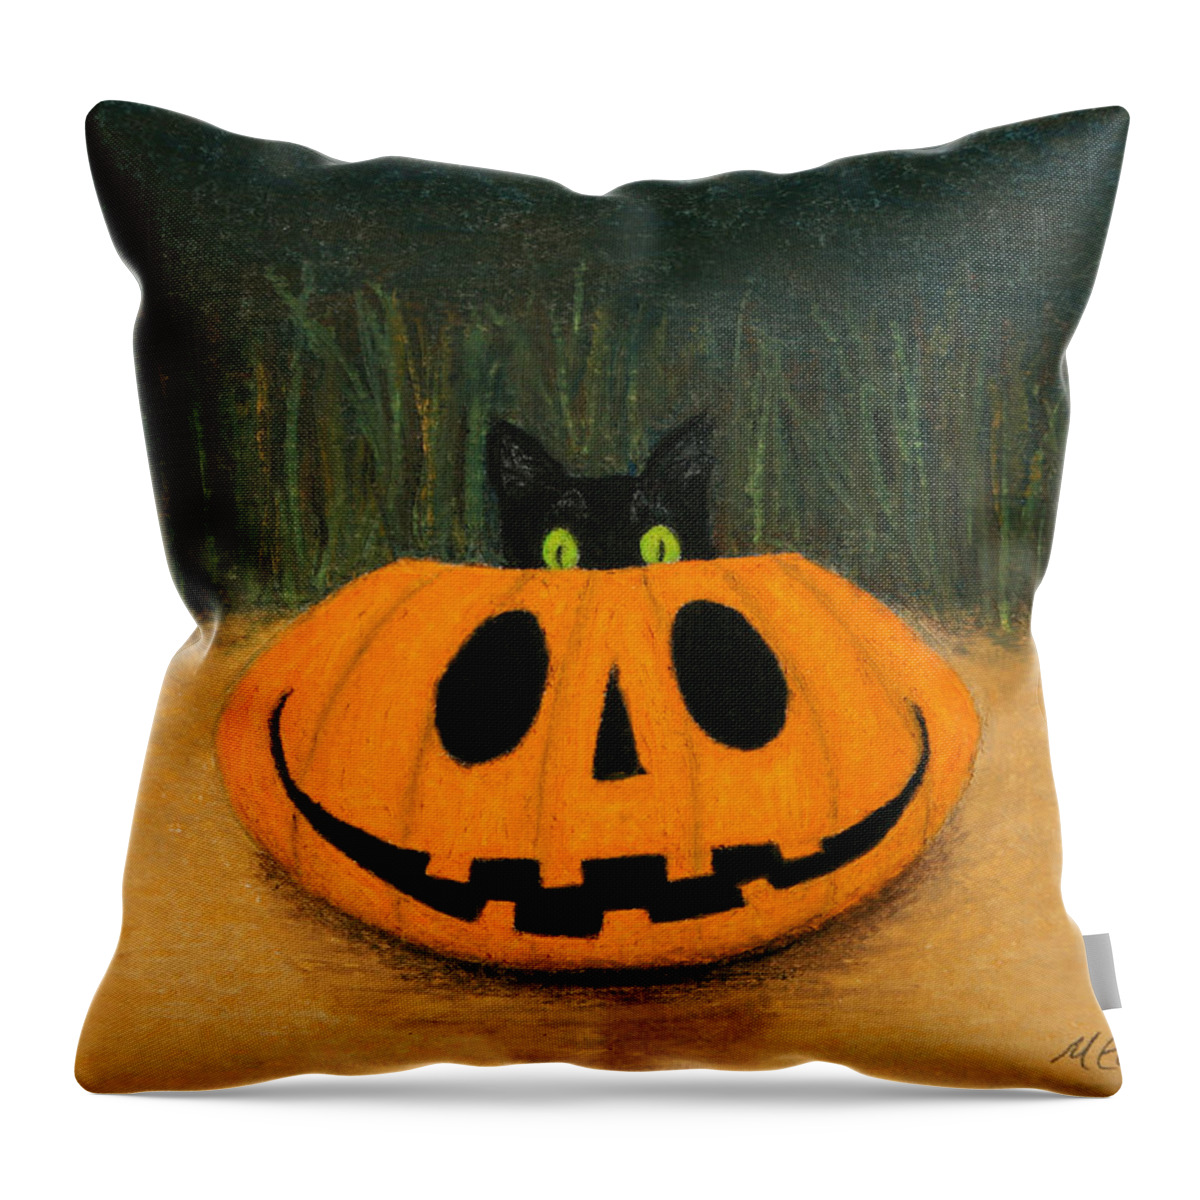 Oil Pastel Throw Pillow featuring the painting Halloween Kitty by Marna Edwards Flavell